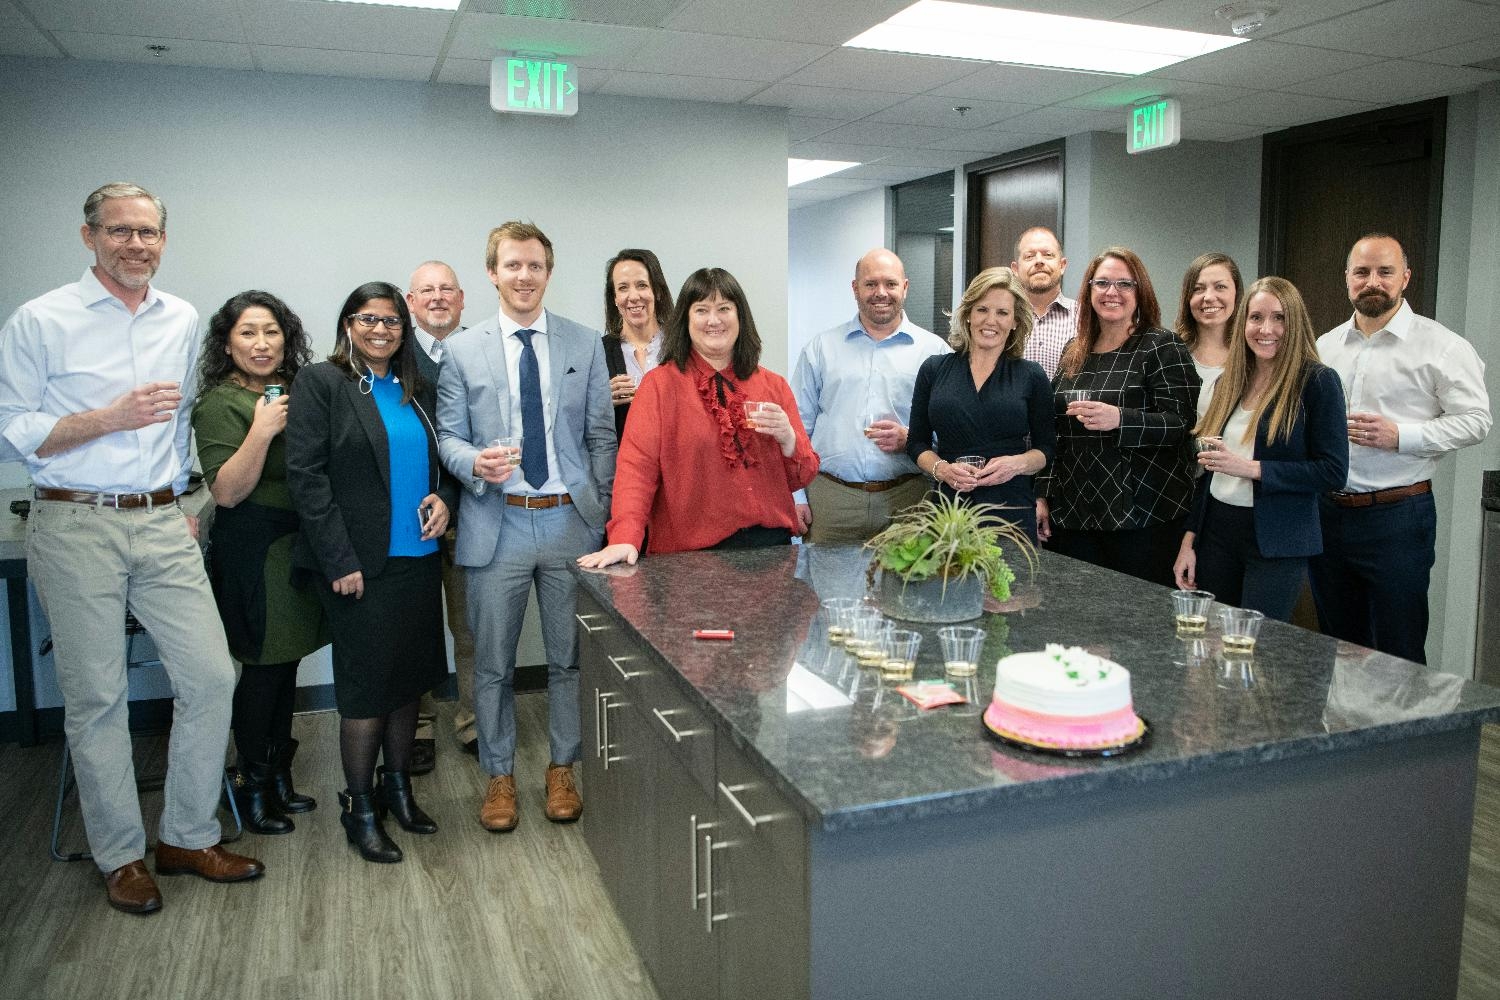 Dietrich Partners group photo & our CEO's birthday celebration - March 2020 (days before the pandemic restrictions hit) 